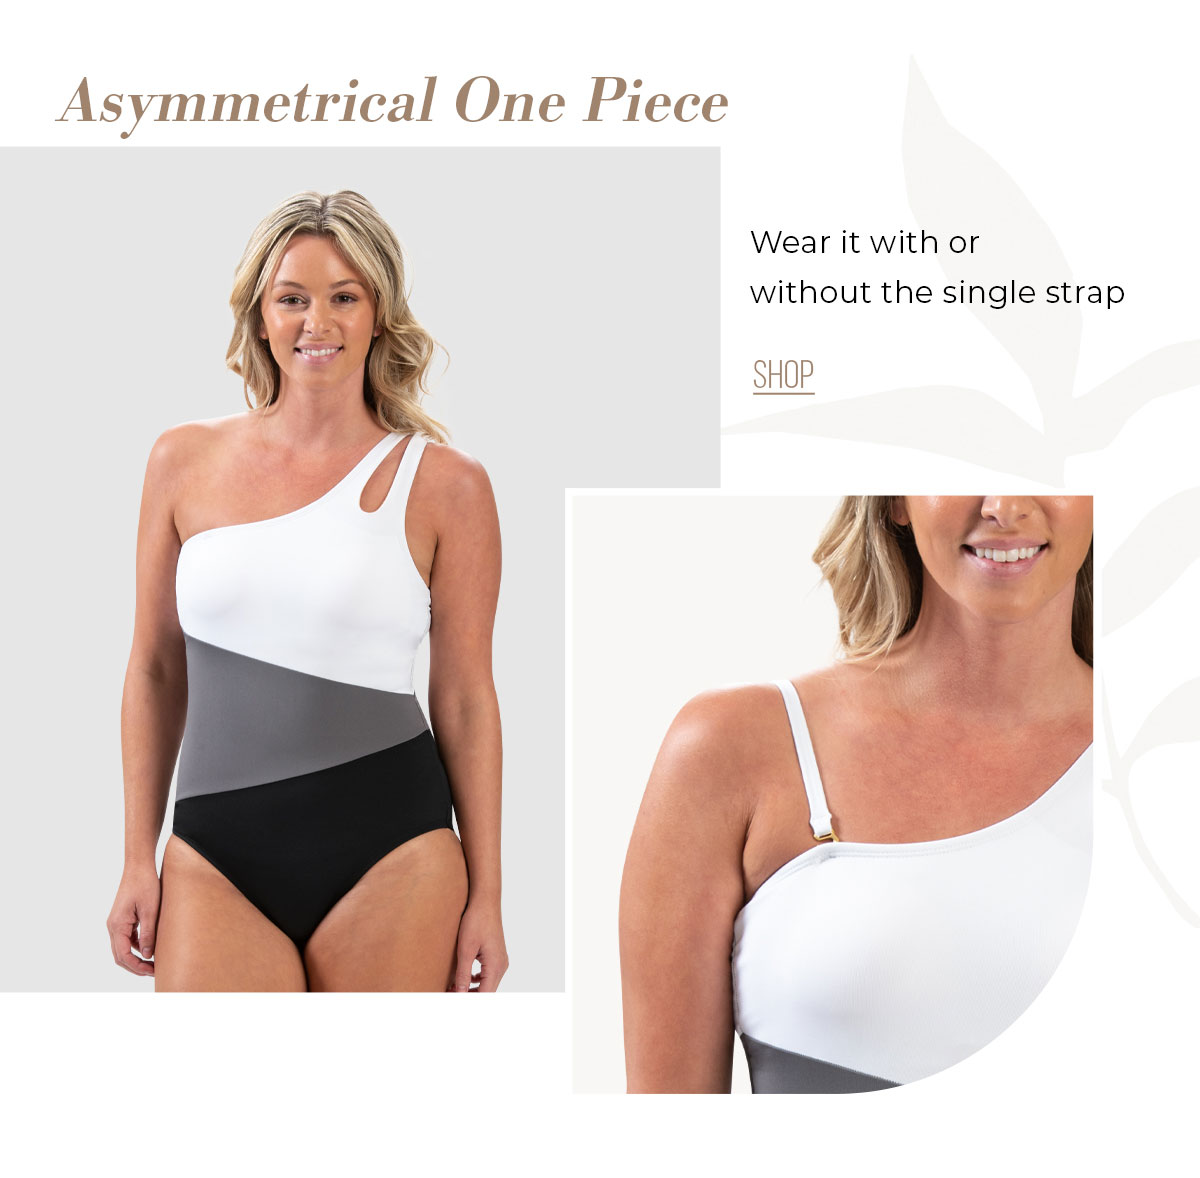 Shop Aquashape Women's Black And White Moderate Asymmetrical One Piece Swimsuit Asymmetrical One Piece Wear it with or without the single strap SHOP 